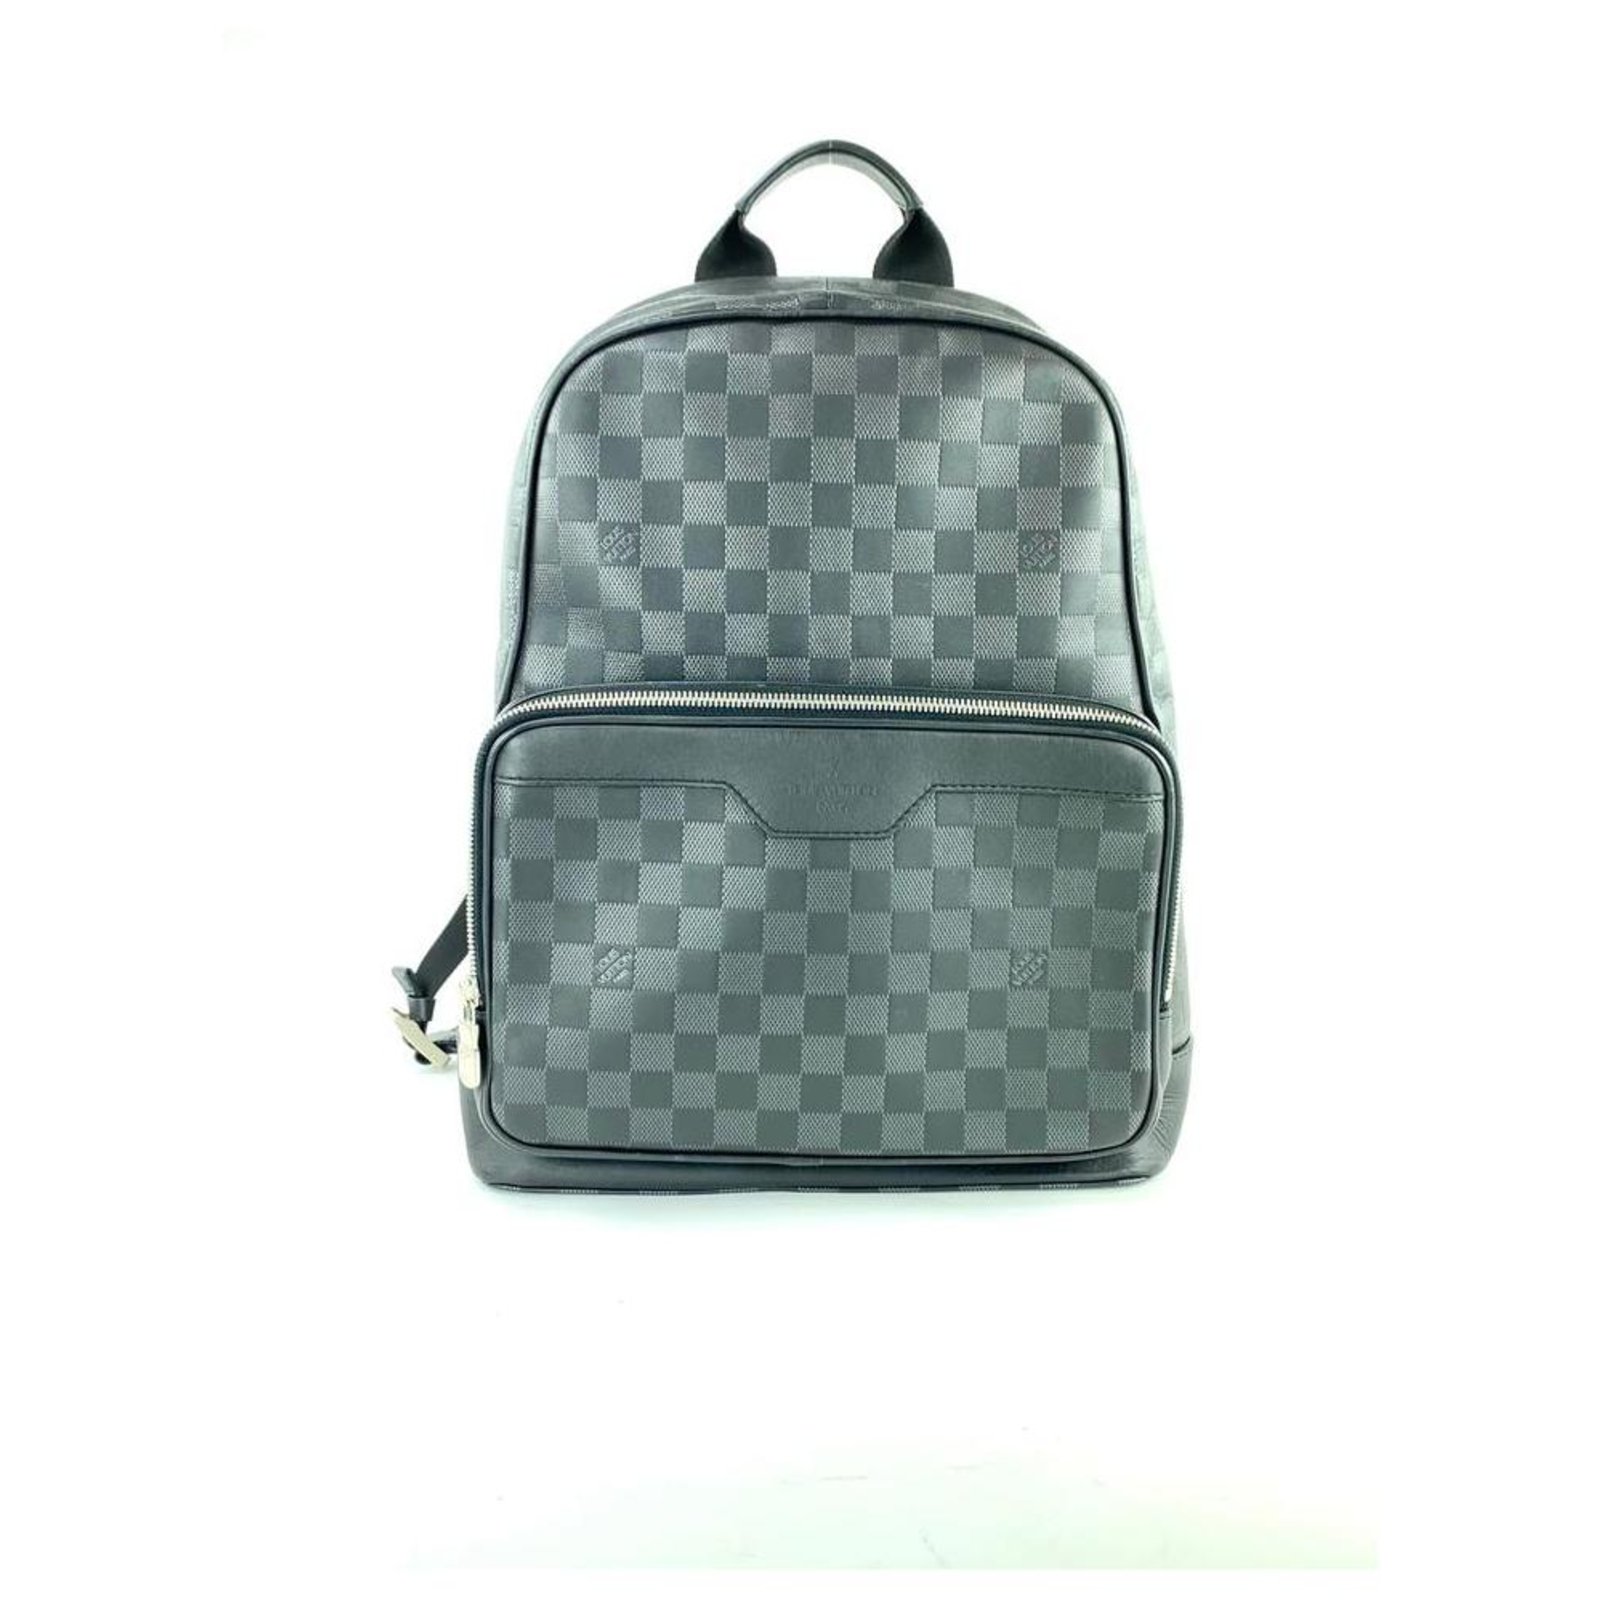 Campus leather bag Louis Vuitton Black in Leather - 29328830